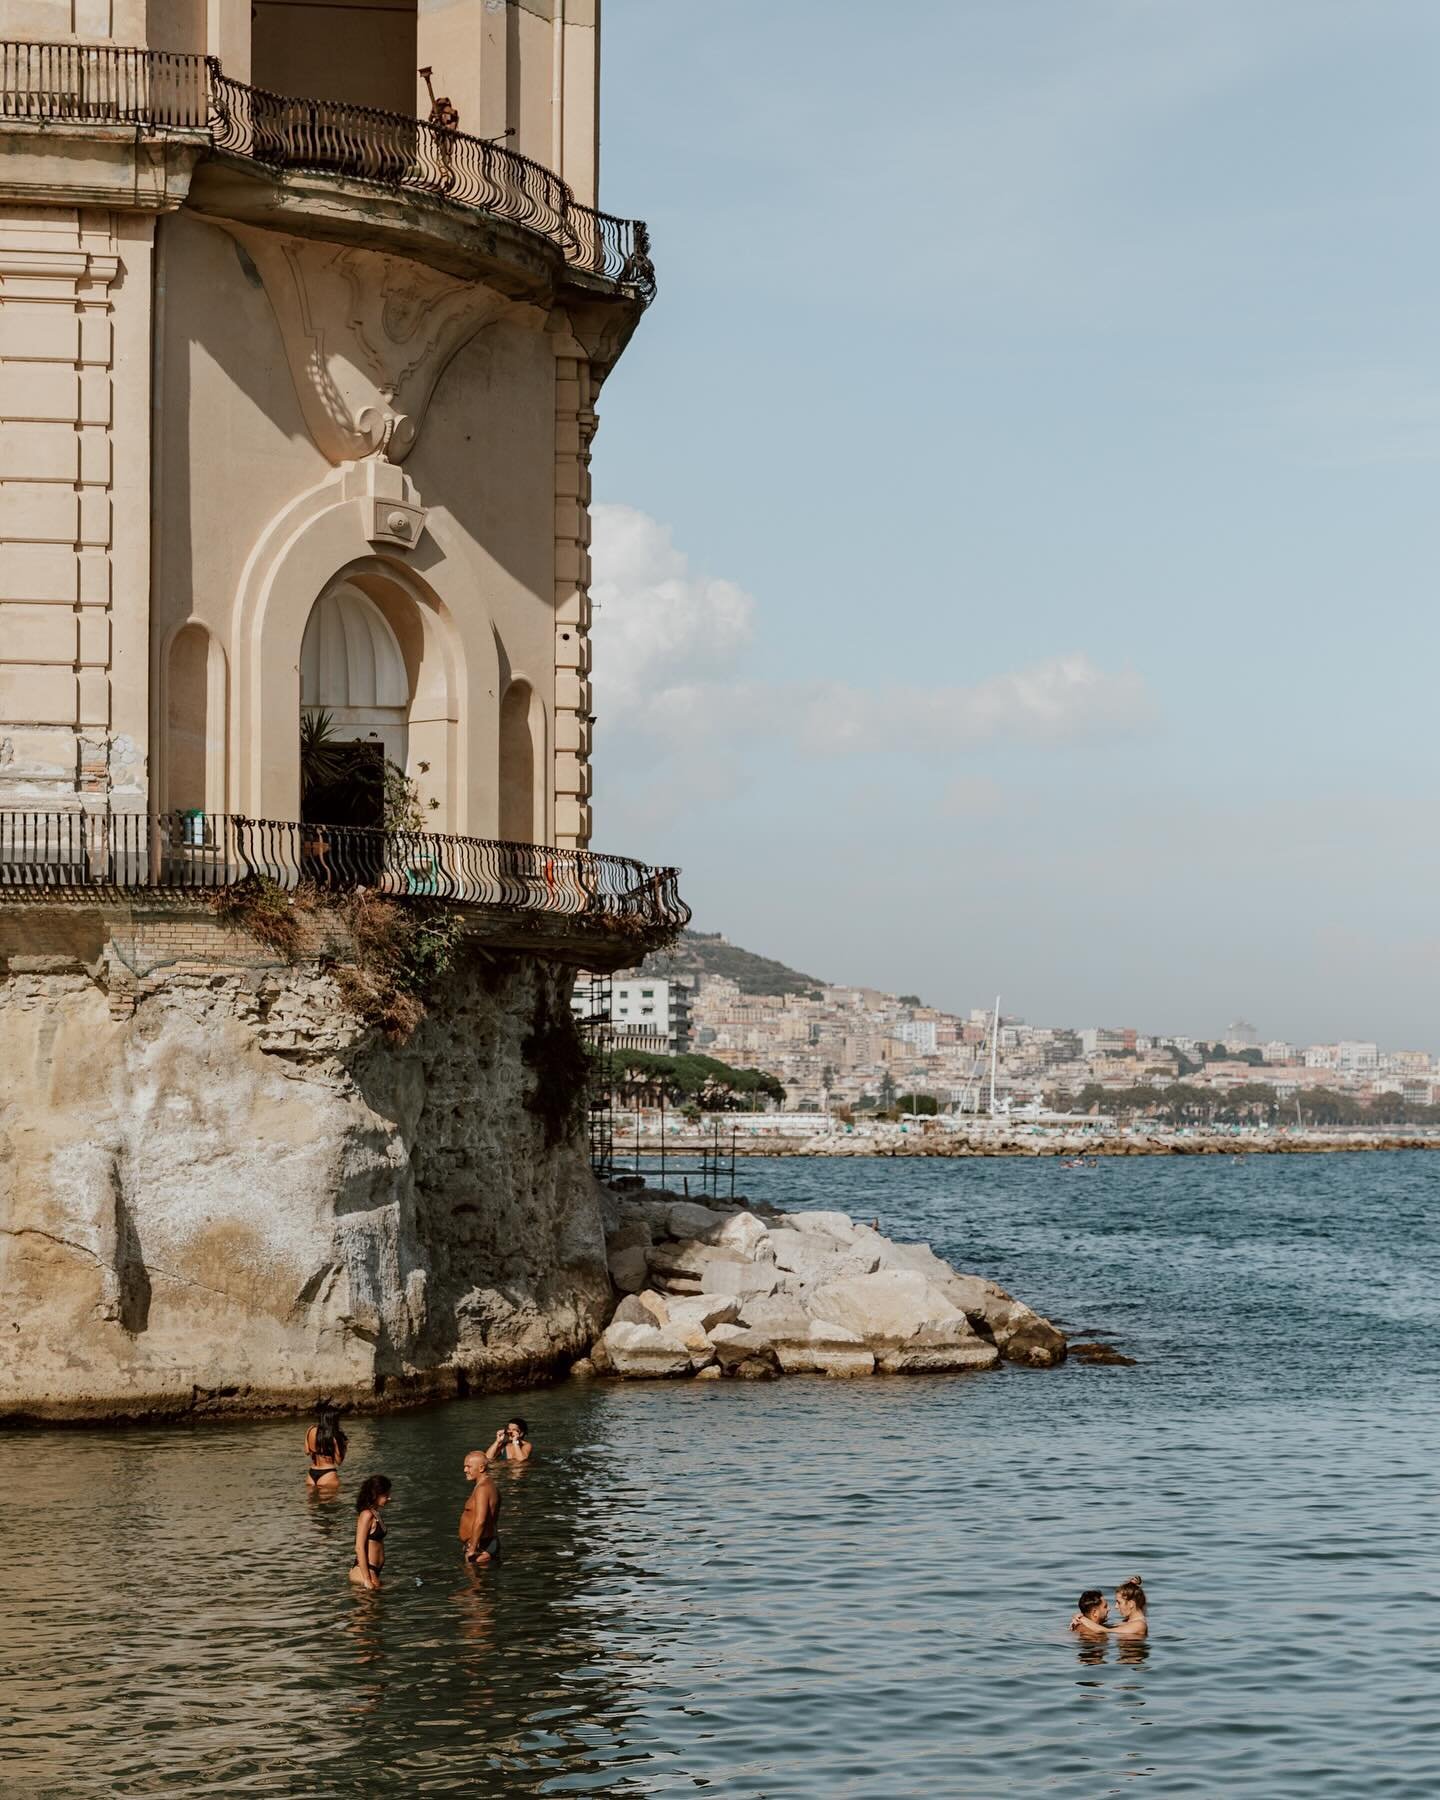 Shore //&nbsp; Whilst one doesn&rsquo;t really come to Napoli to sunbathe and swim, bronzing bodies can always be found on the rocks and smooth stone along its photogenic lungomare.

Vesuvius broods across the water whilst old boys lounge around in s